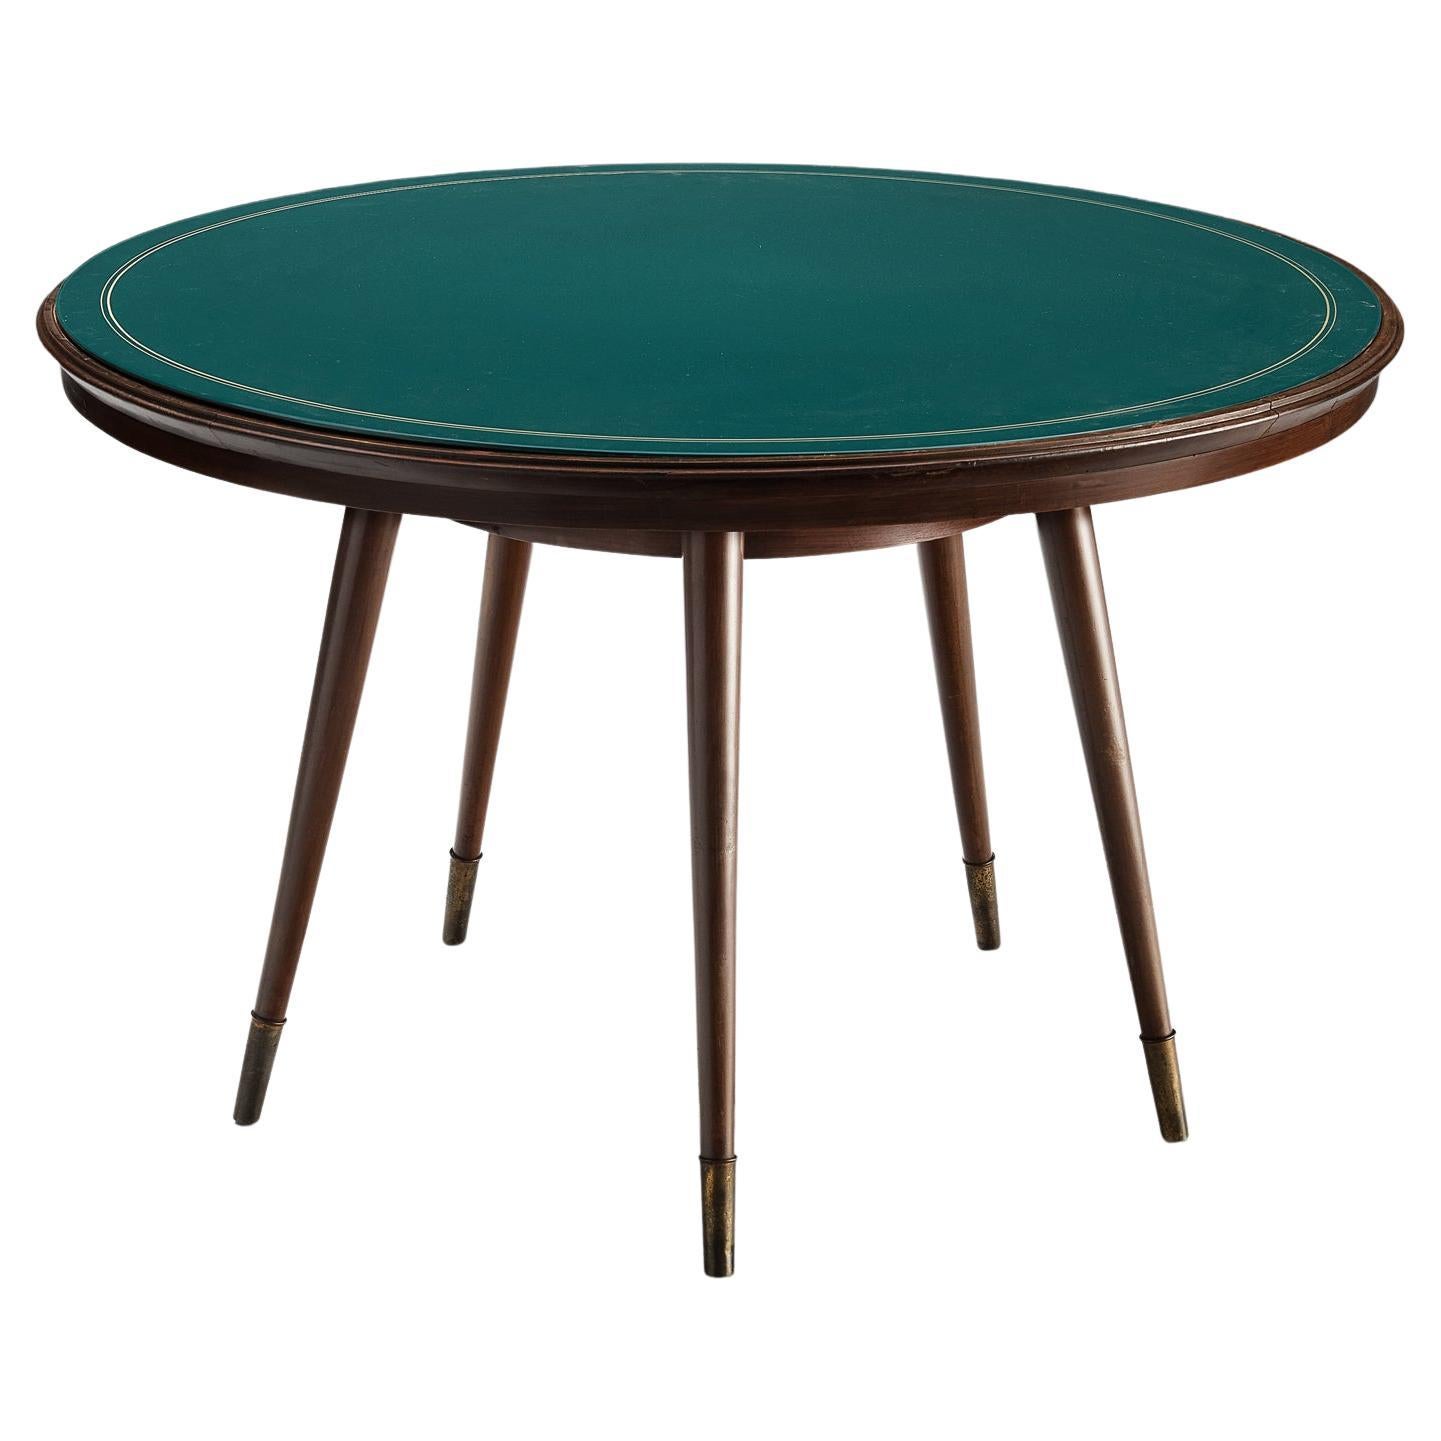 Italian Round Table With Glass Top For Sale